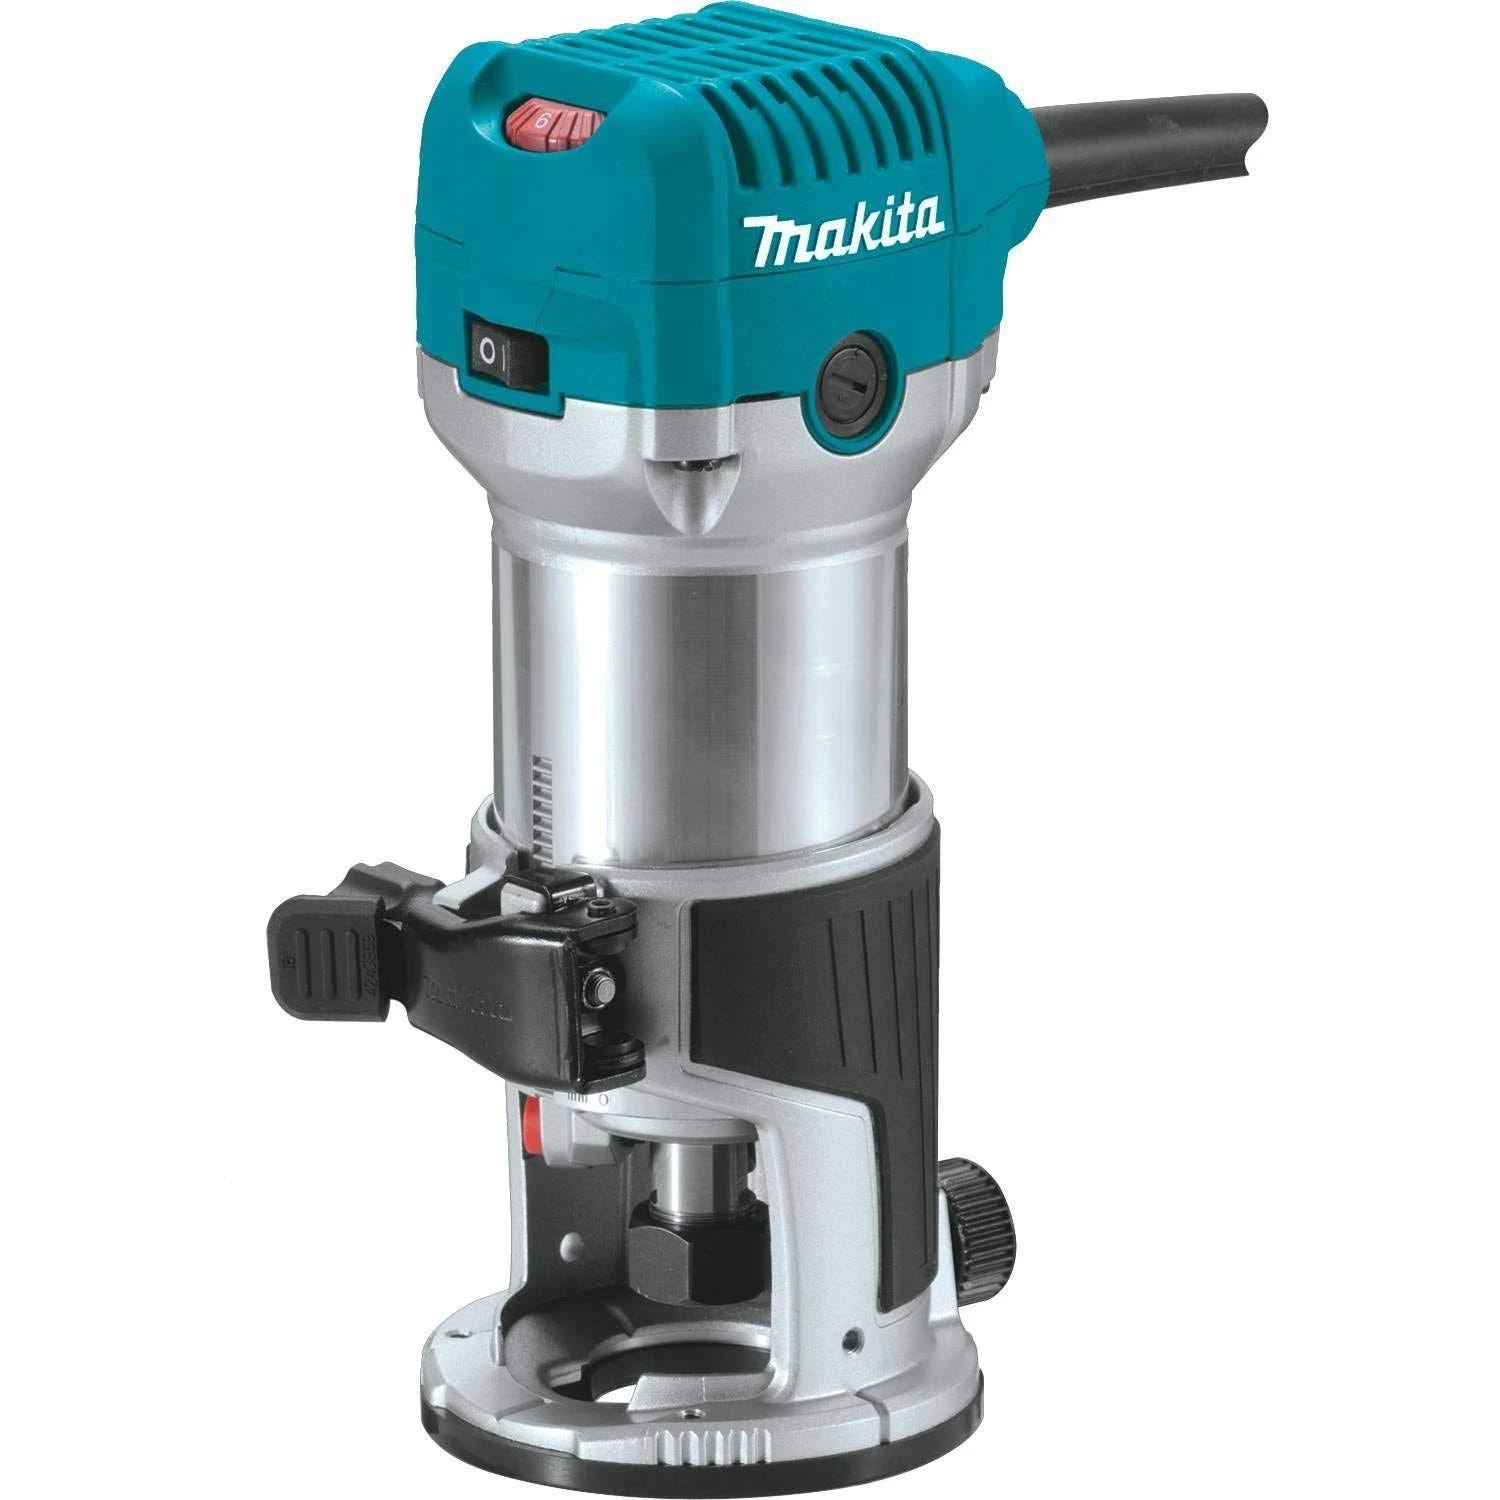 Makita RT0701C Compact Router with 1-1/4 HP Performance | Image